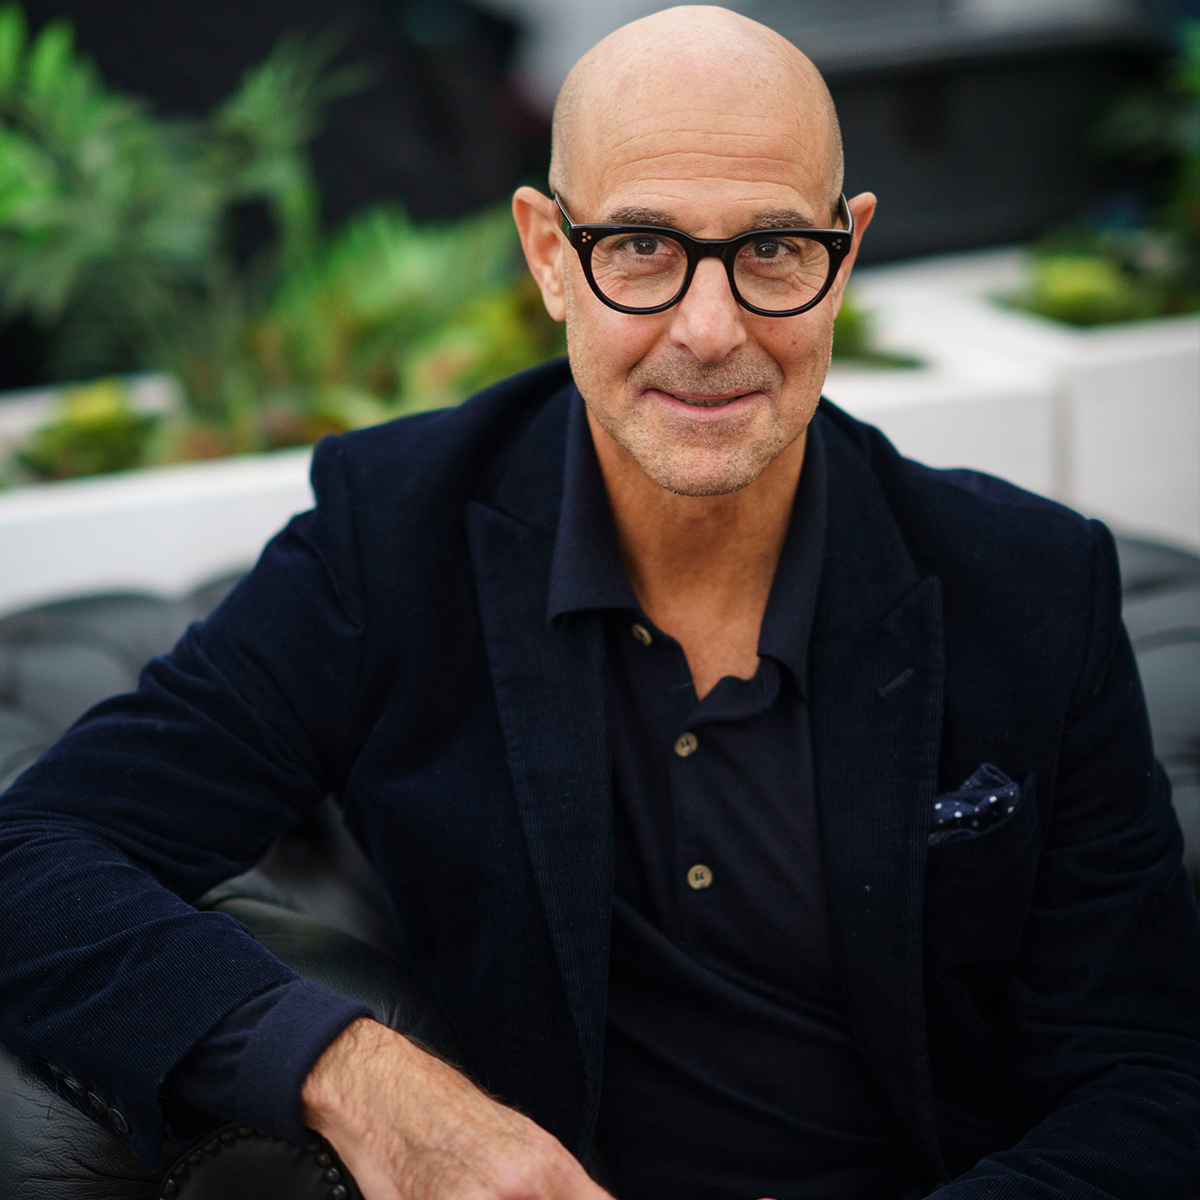 stanley tucci travel guide